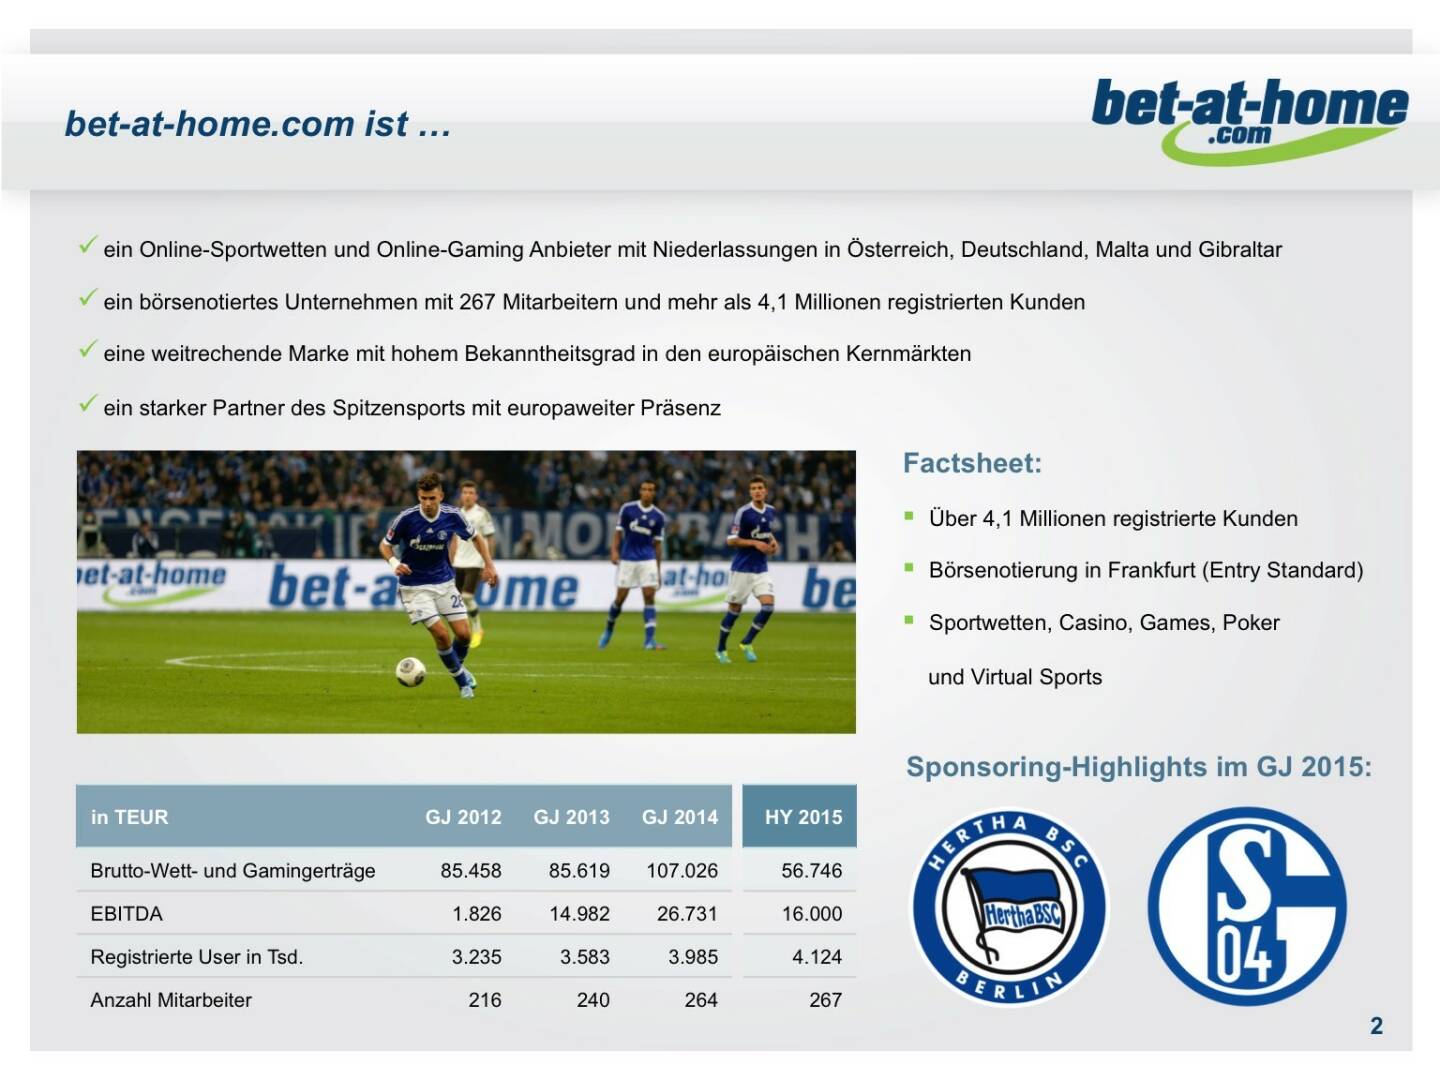 bet-at-home.com ist...